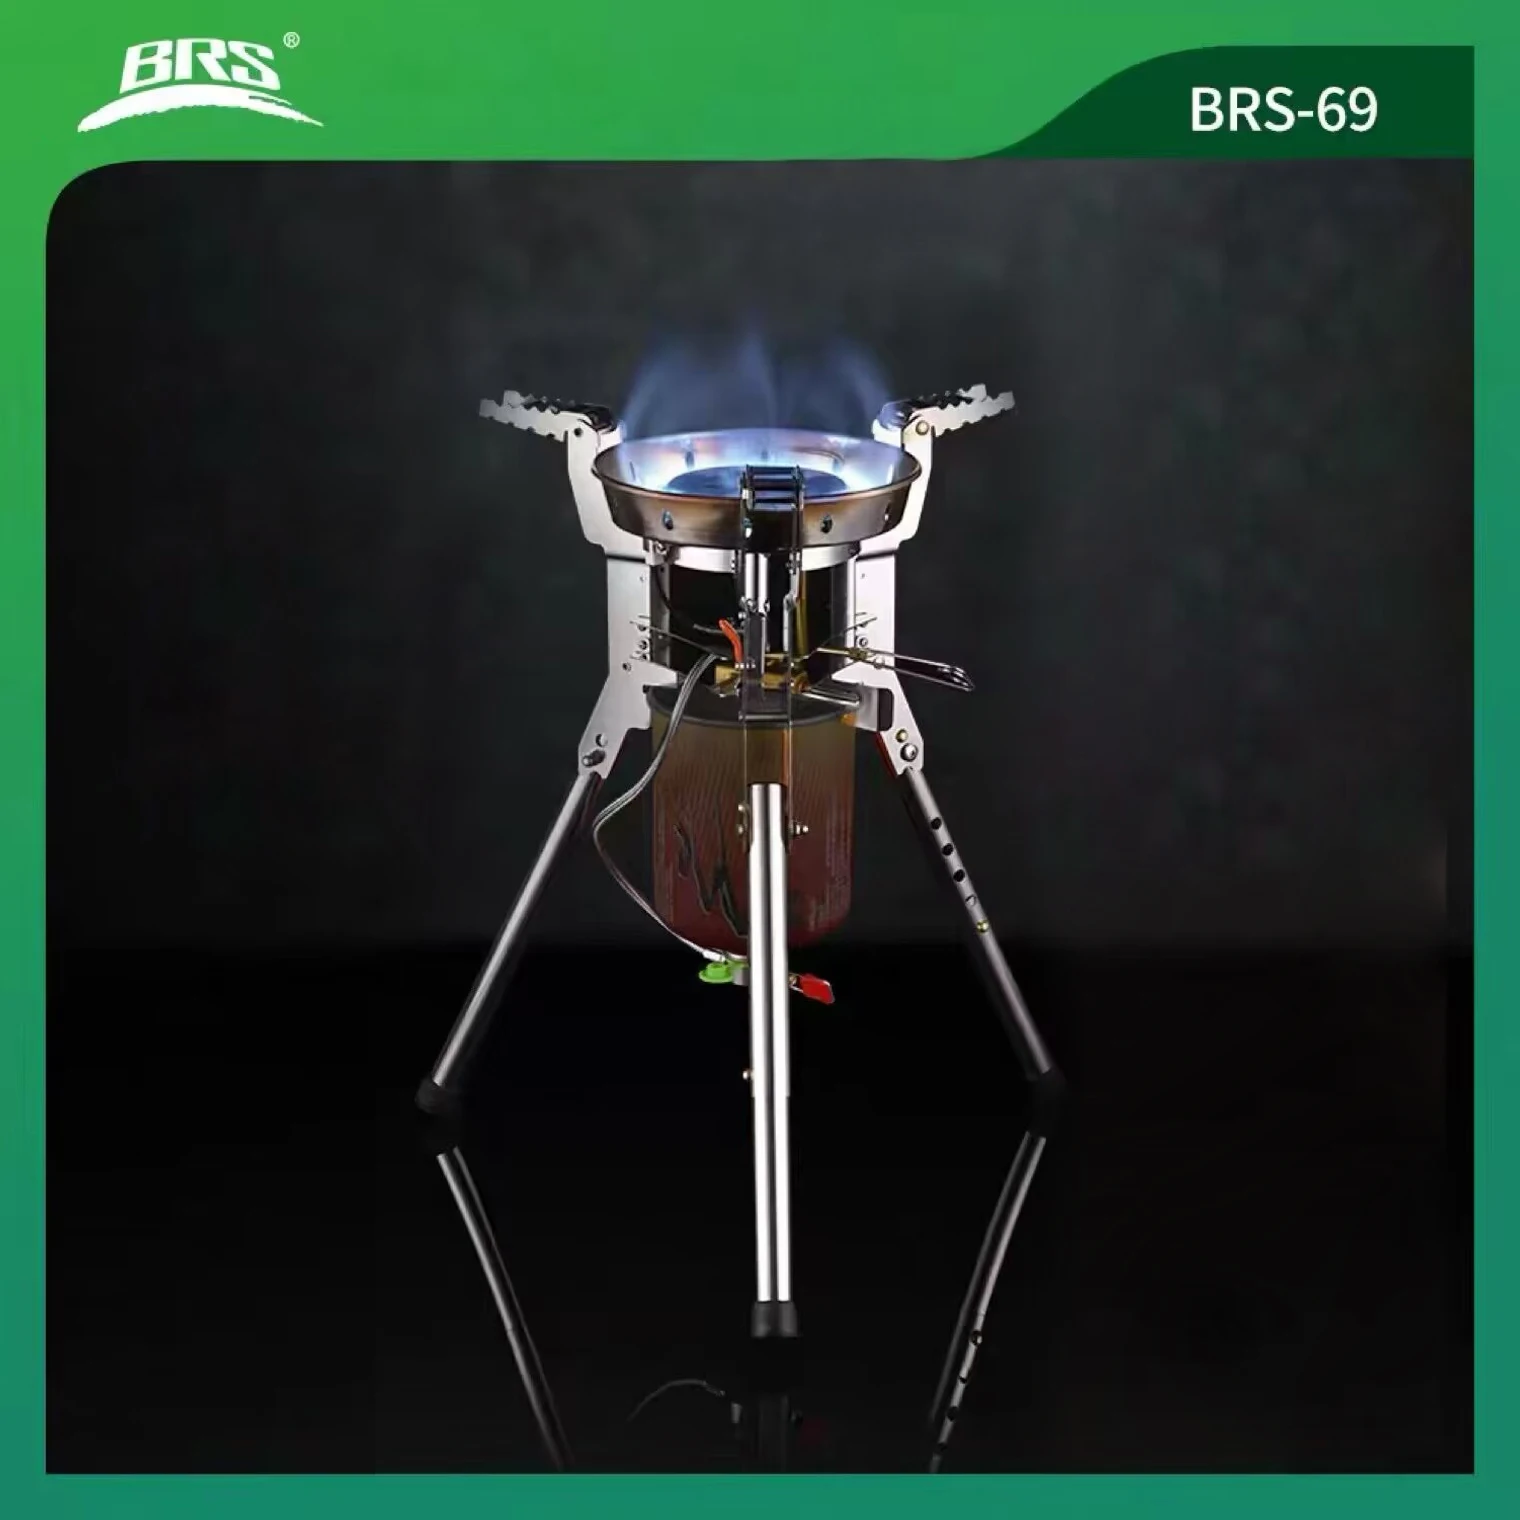 BRS 4360W Outdoor Camping Gas Stove Portable Foldable Burner